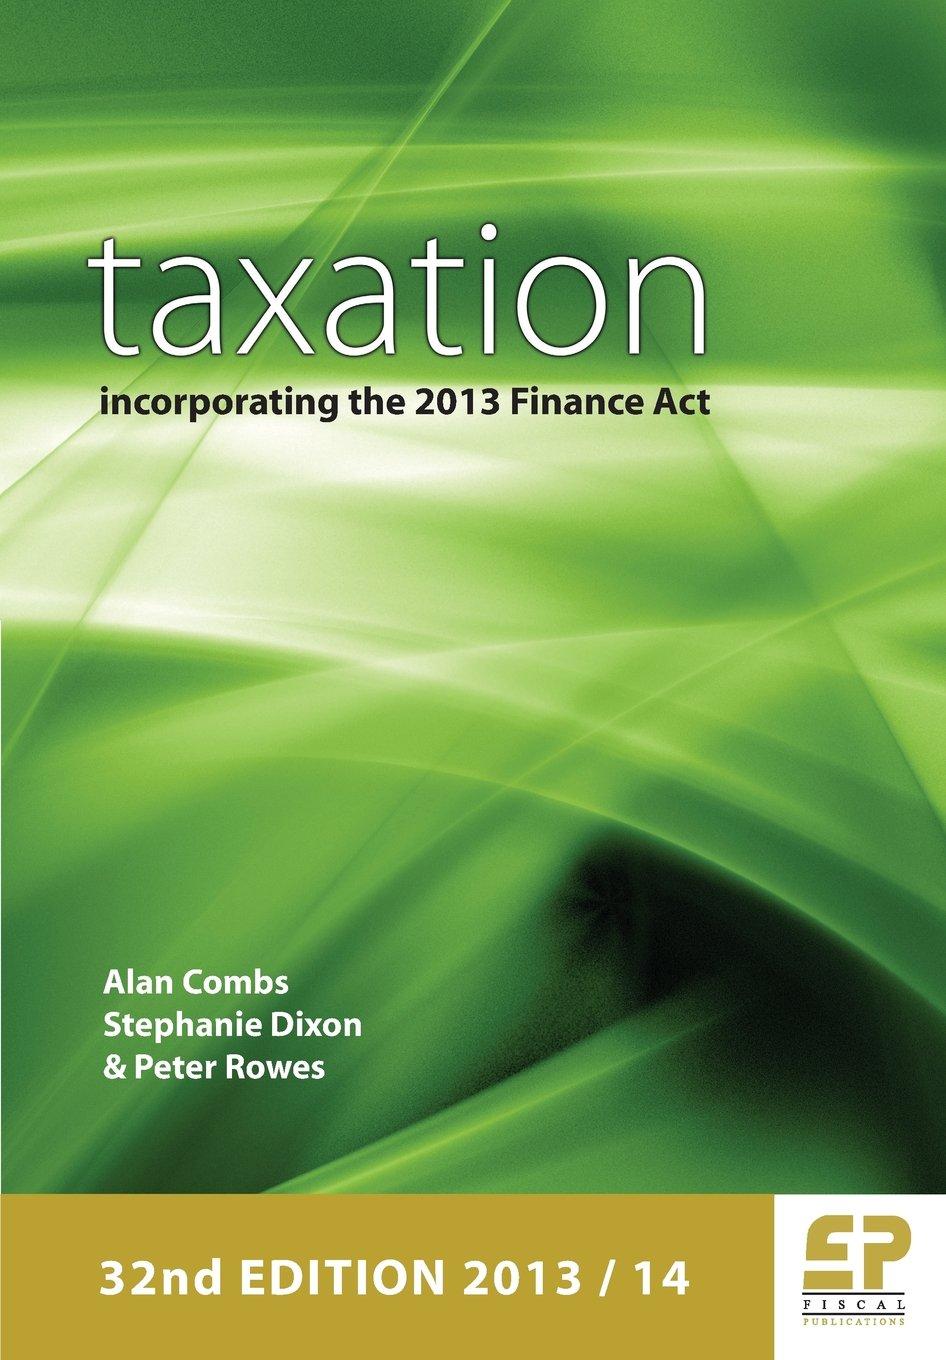 taxation incorporating the 2013 finance act 32nd edition alan combs, stephanie dixon, peter rowes 1906201218,